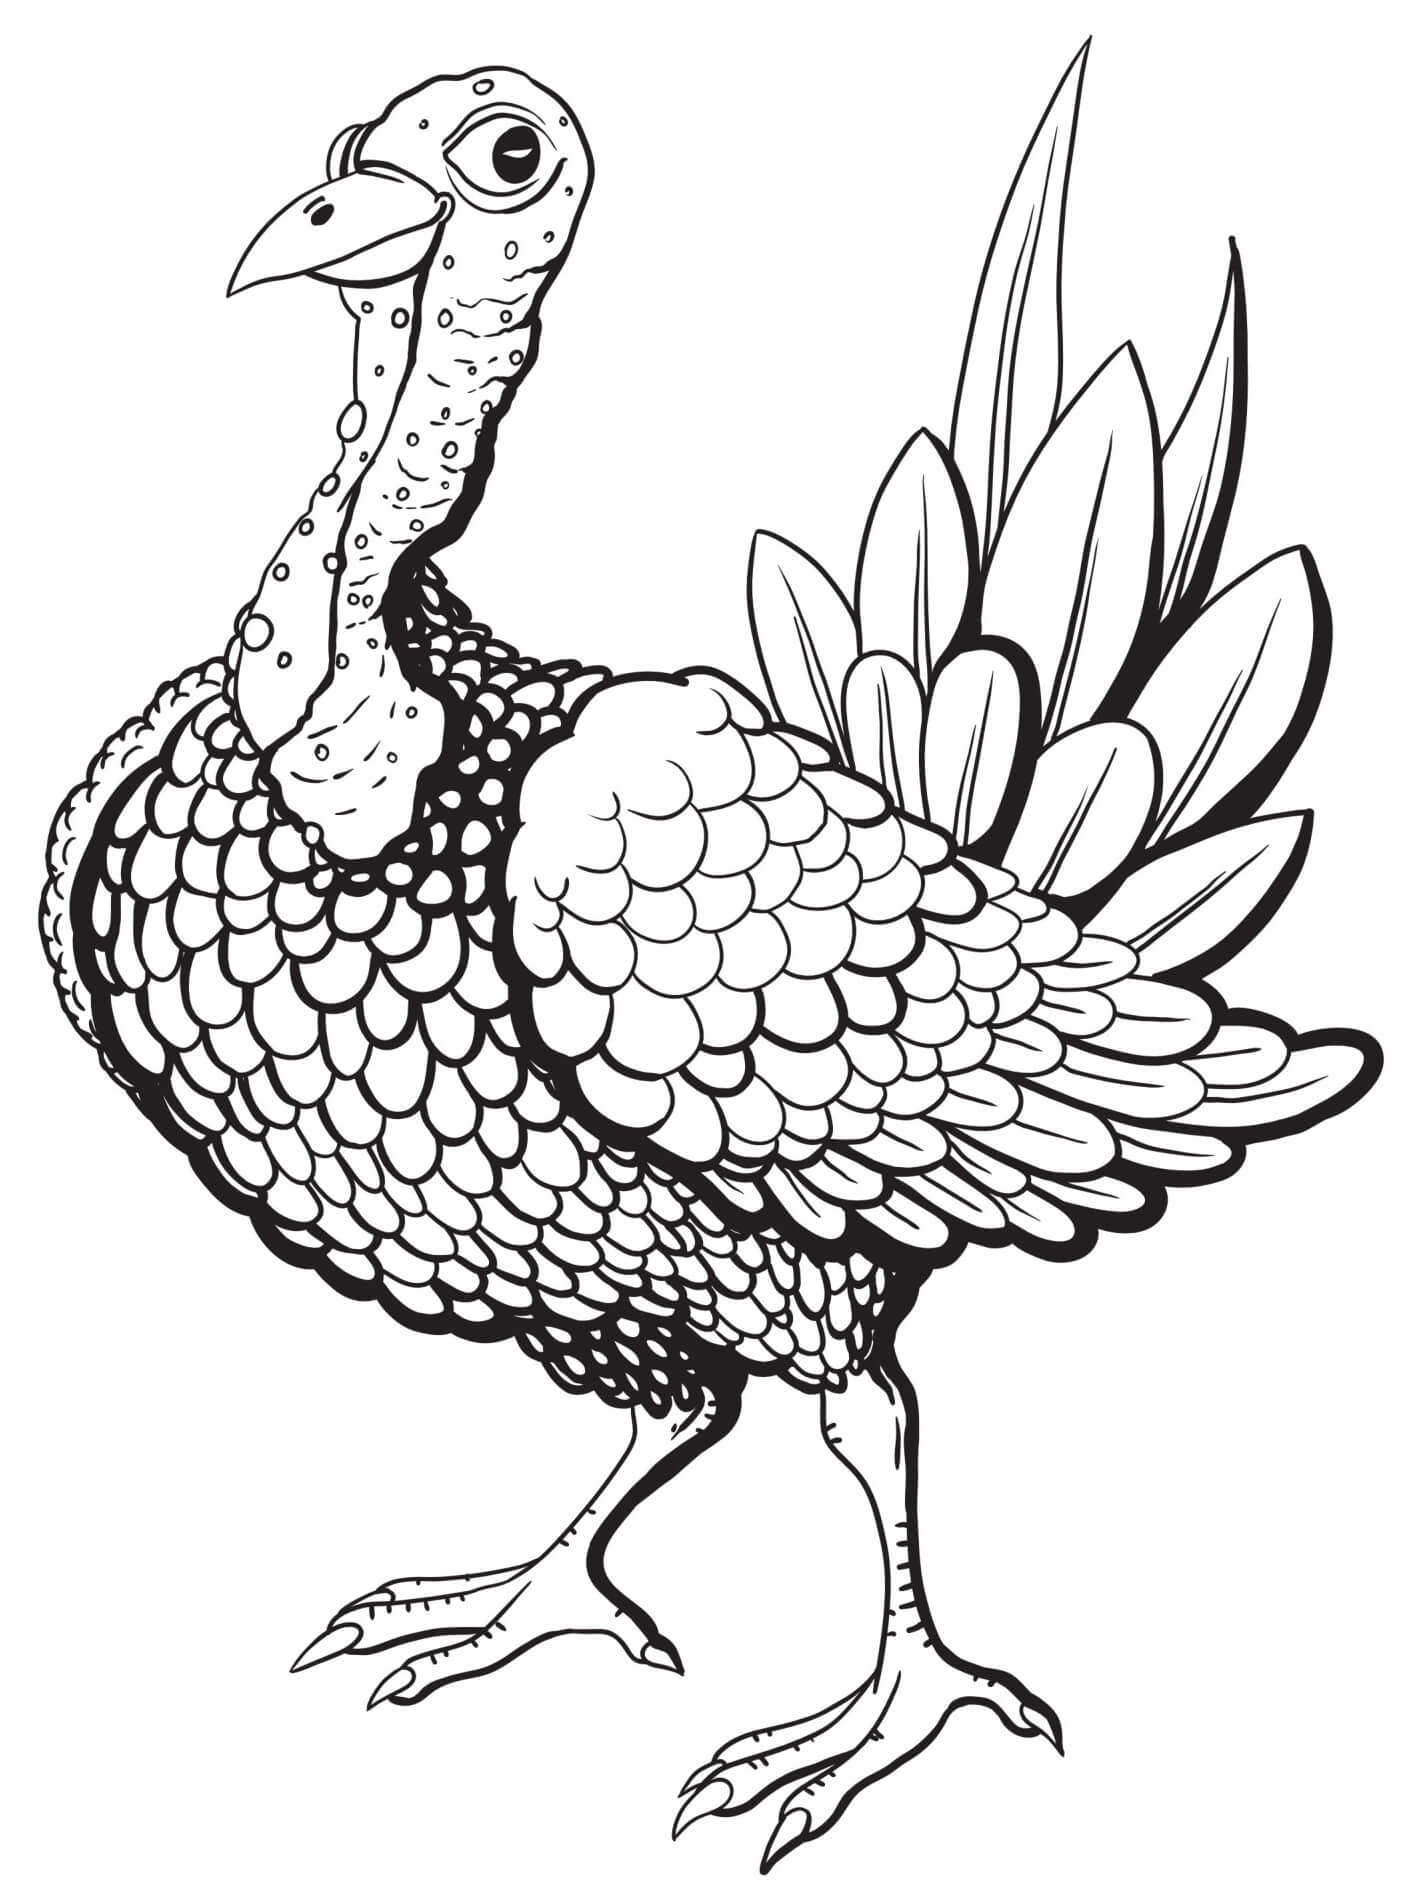 Thanksgiving Turkey Bumpy Neck Coloring Page